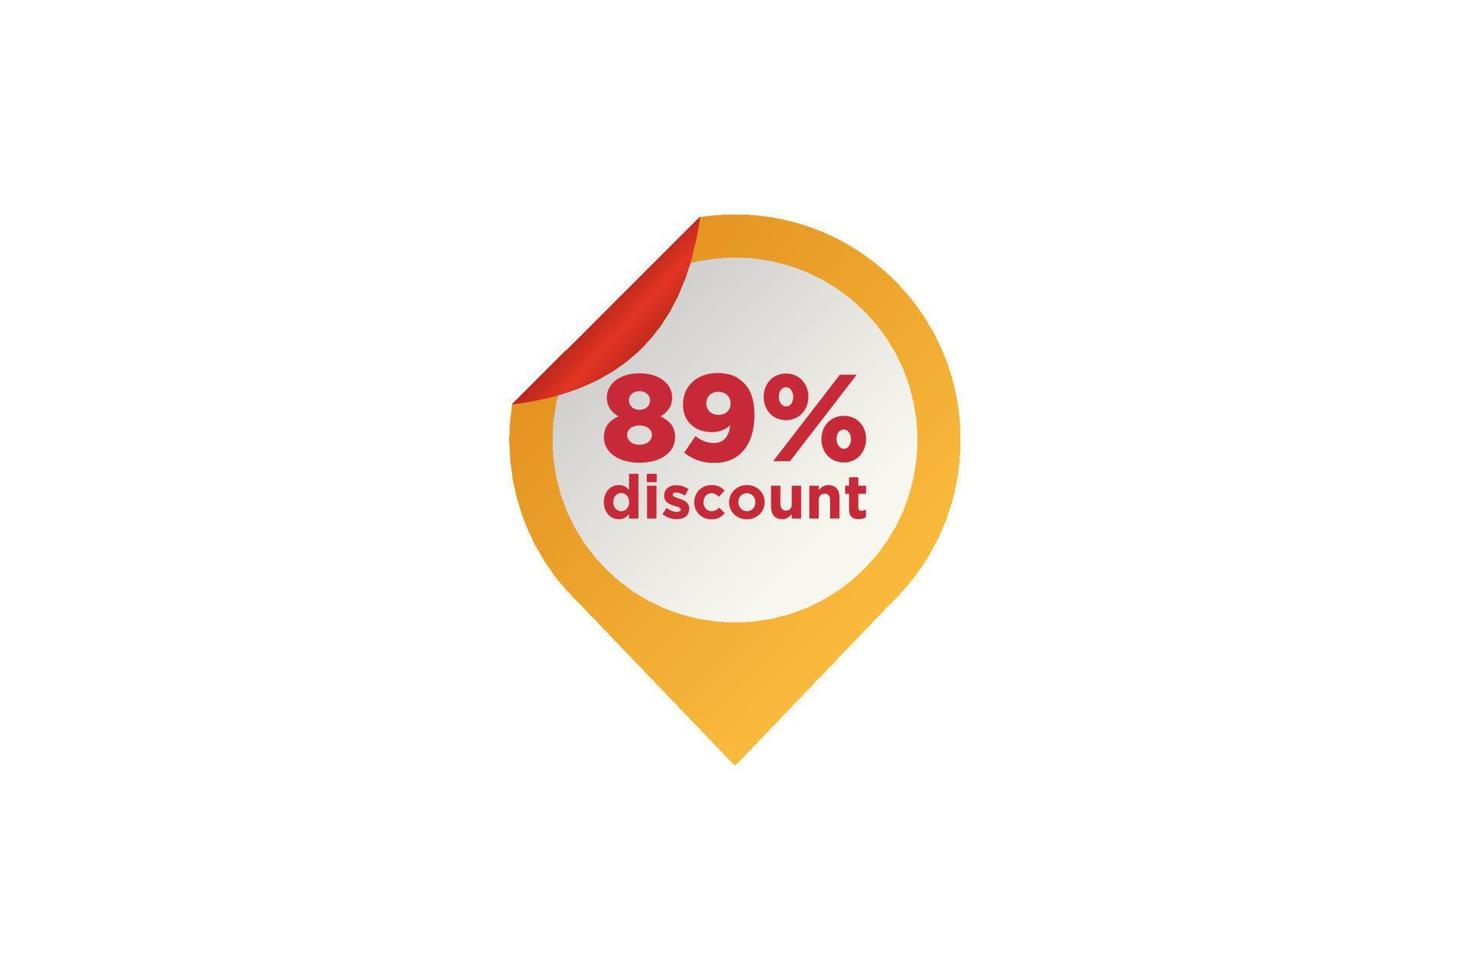 89 discount, Sales Vector badges for Labels, , Stickers, Banners, Tags, Web Stickers, New offer. Discount origami sign banner.